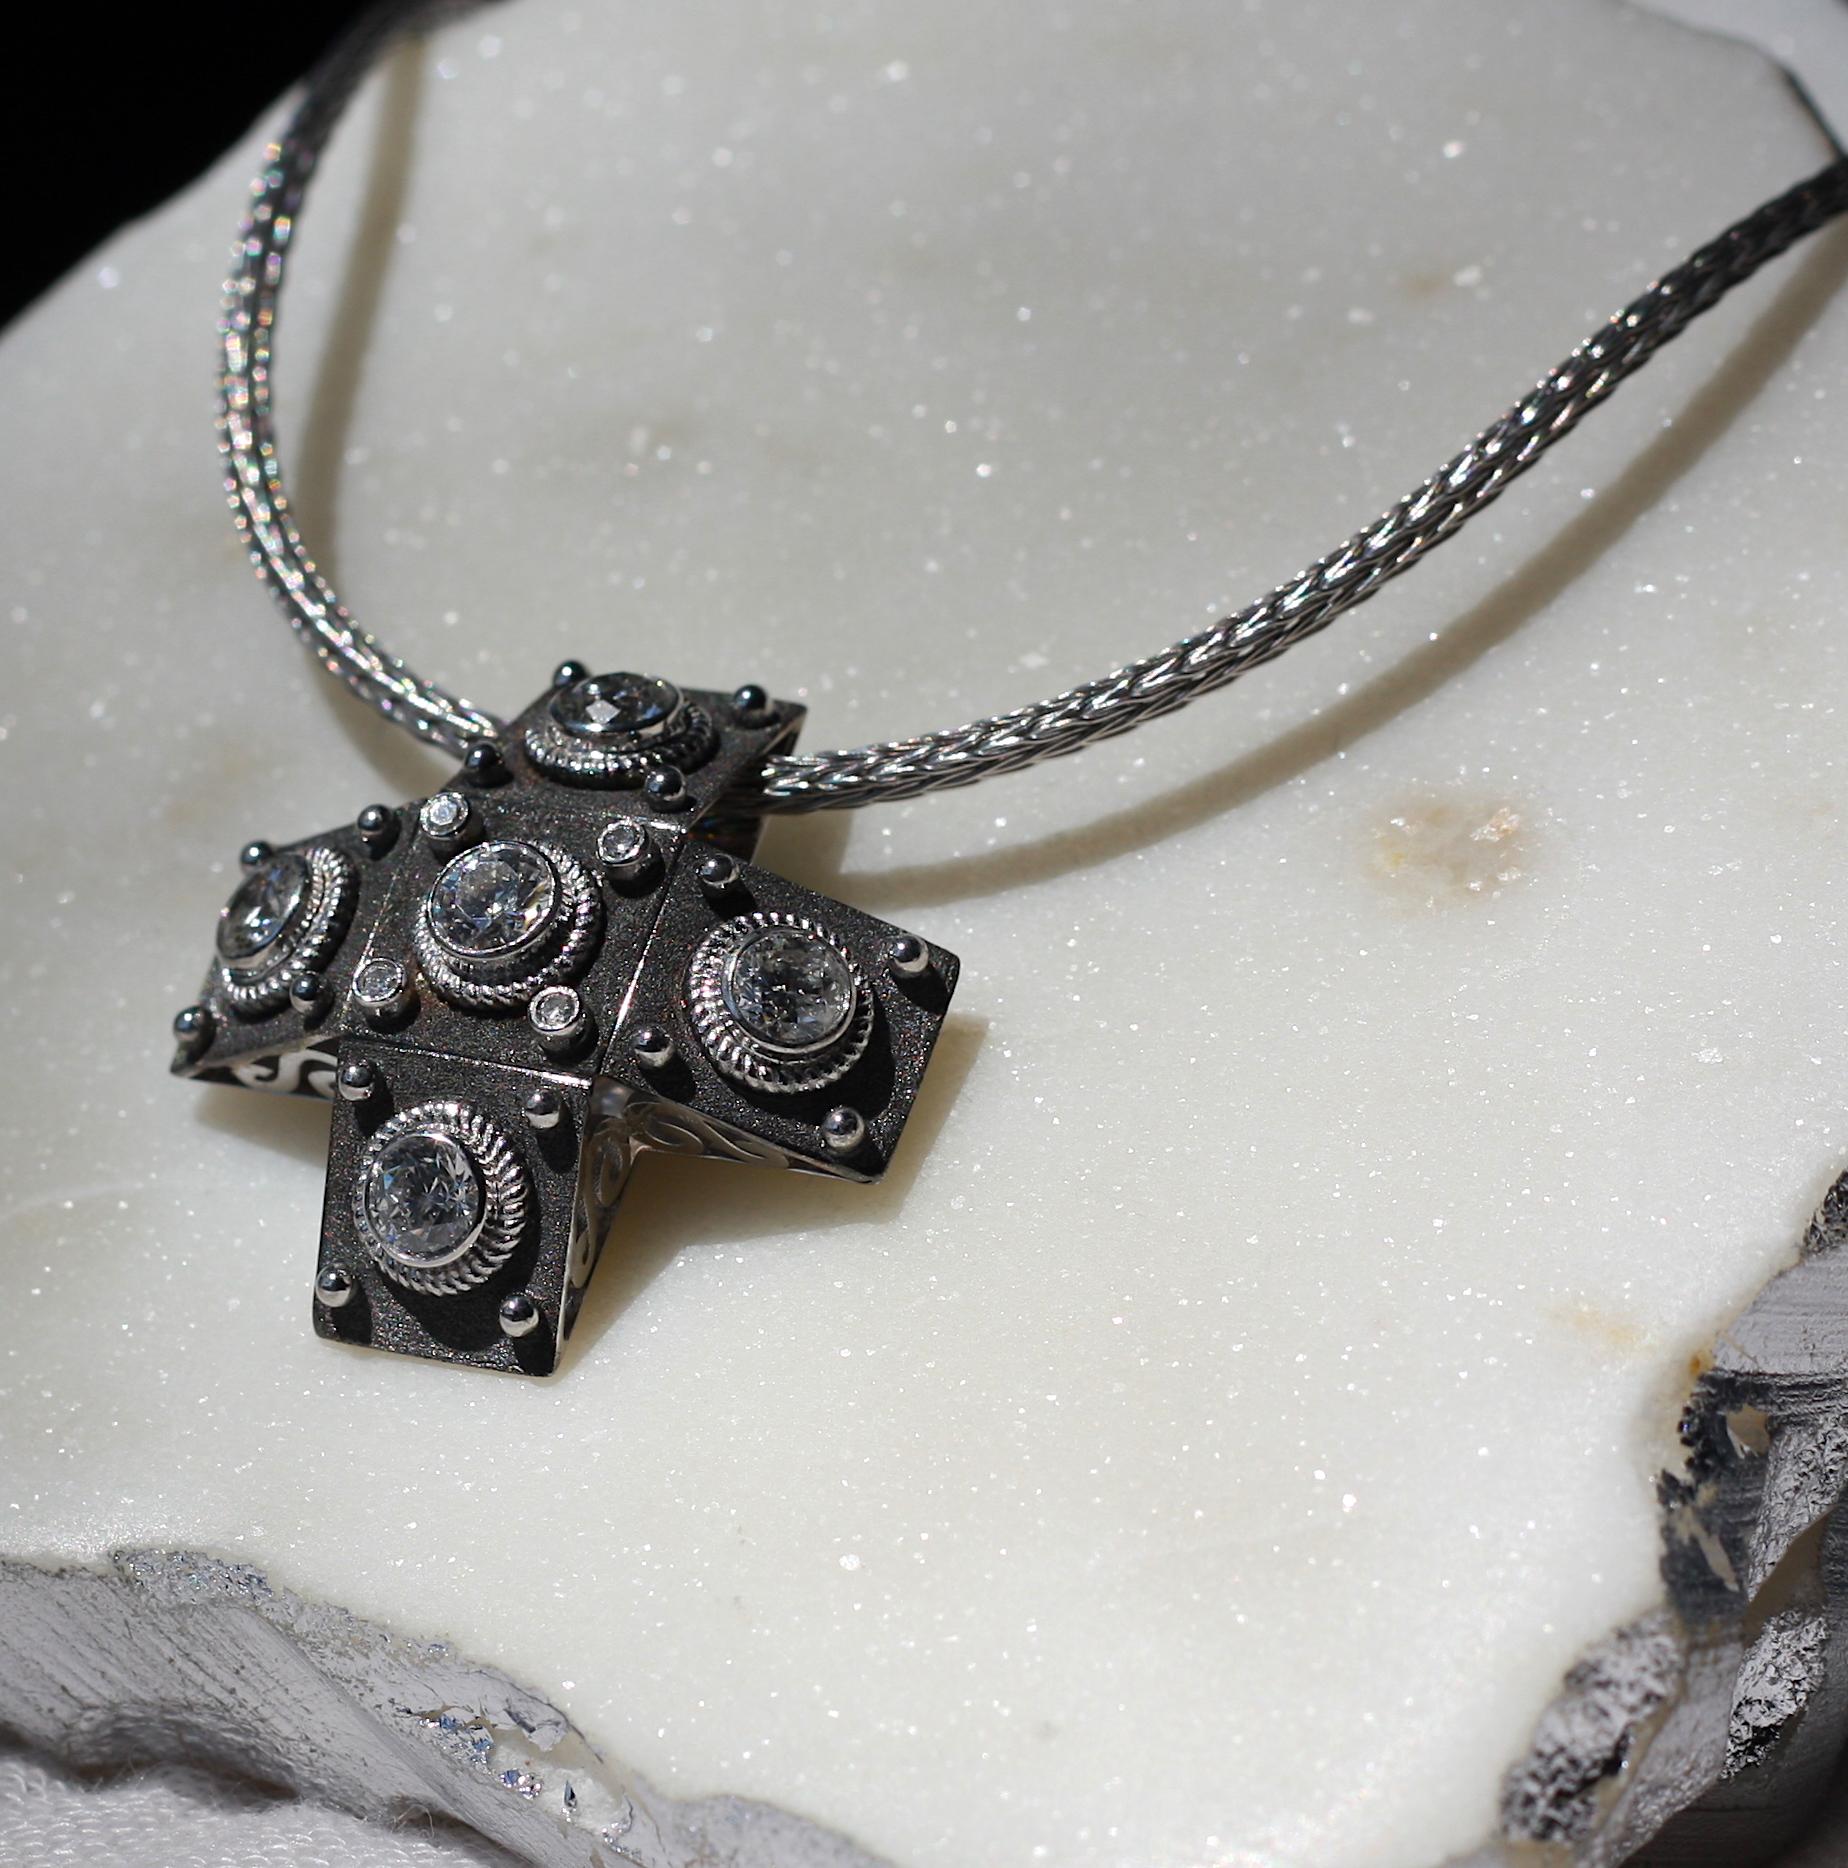 S.Georgios designer Cross in solid 18 Karat White Gold all handmade with Byzantine workmanship. This cross is decorated with granulation details and the unique Byzantine velvet surface finished with Black Rhodium, the most expensive metal in the